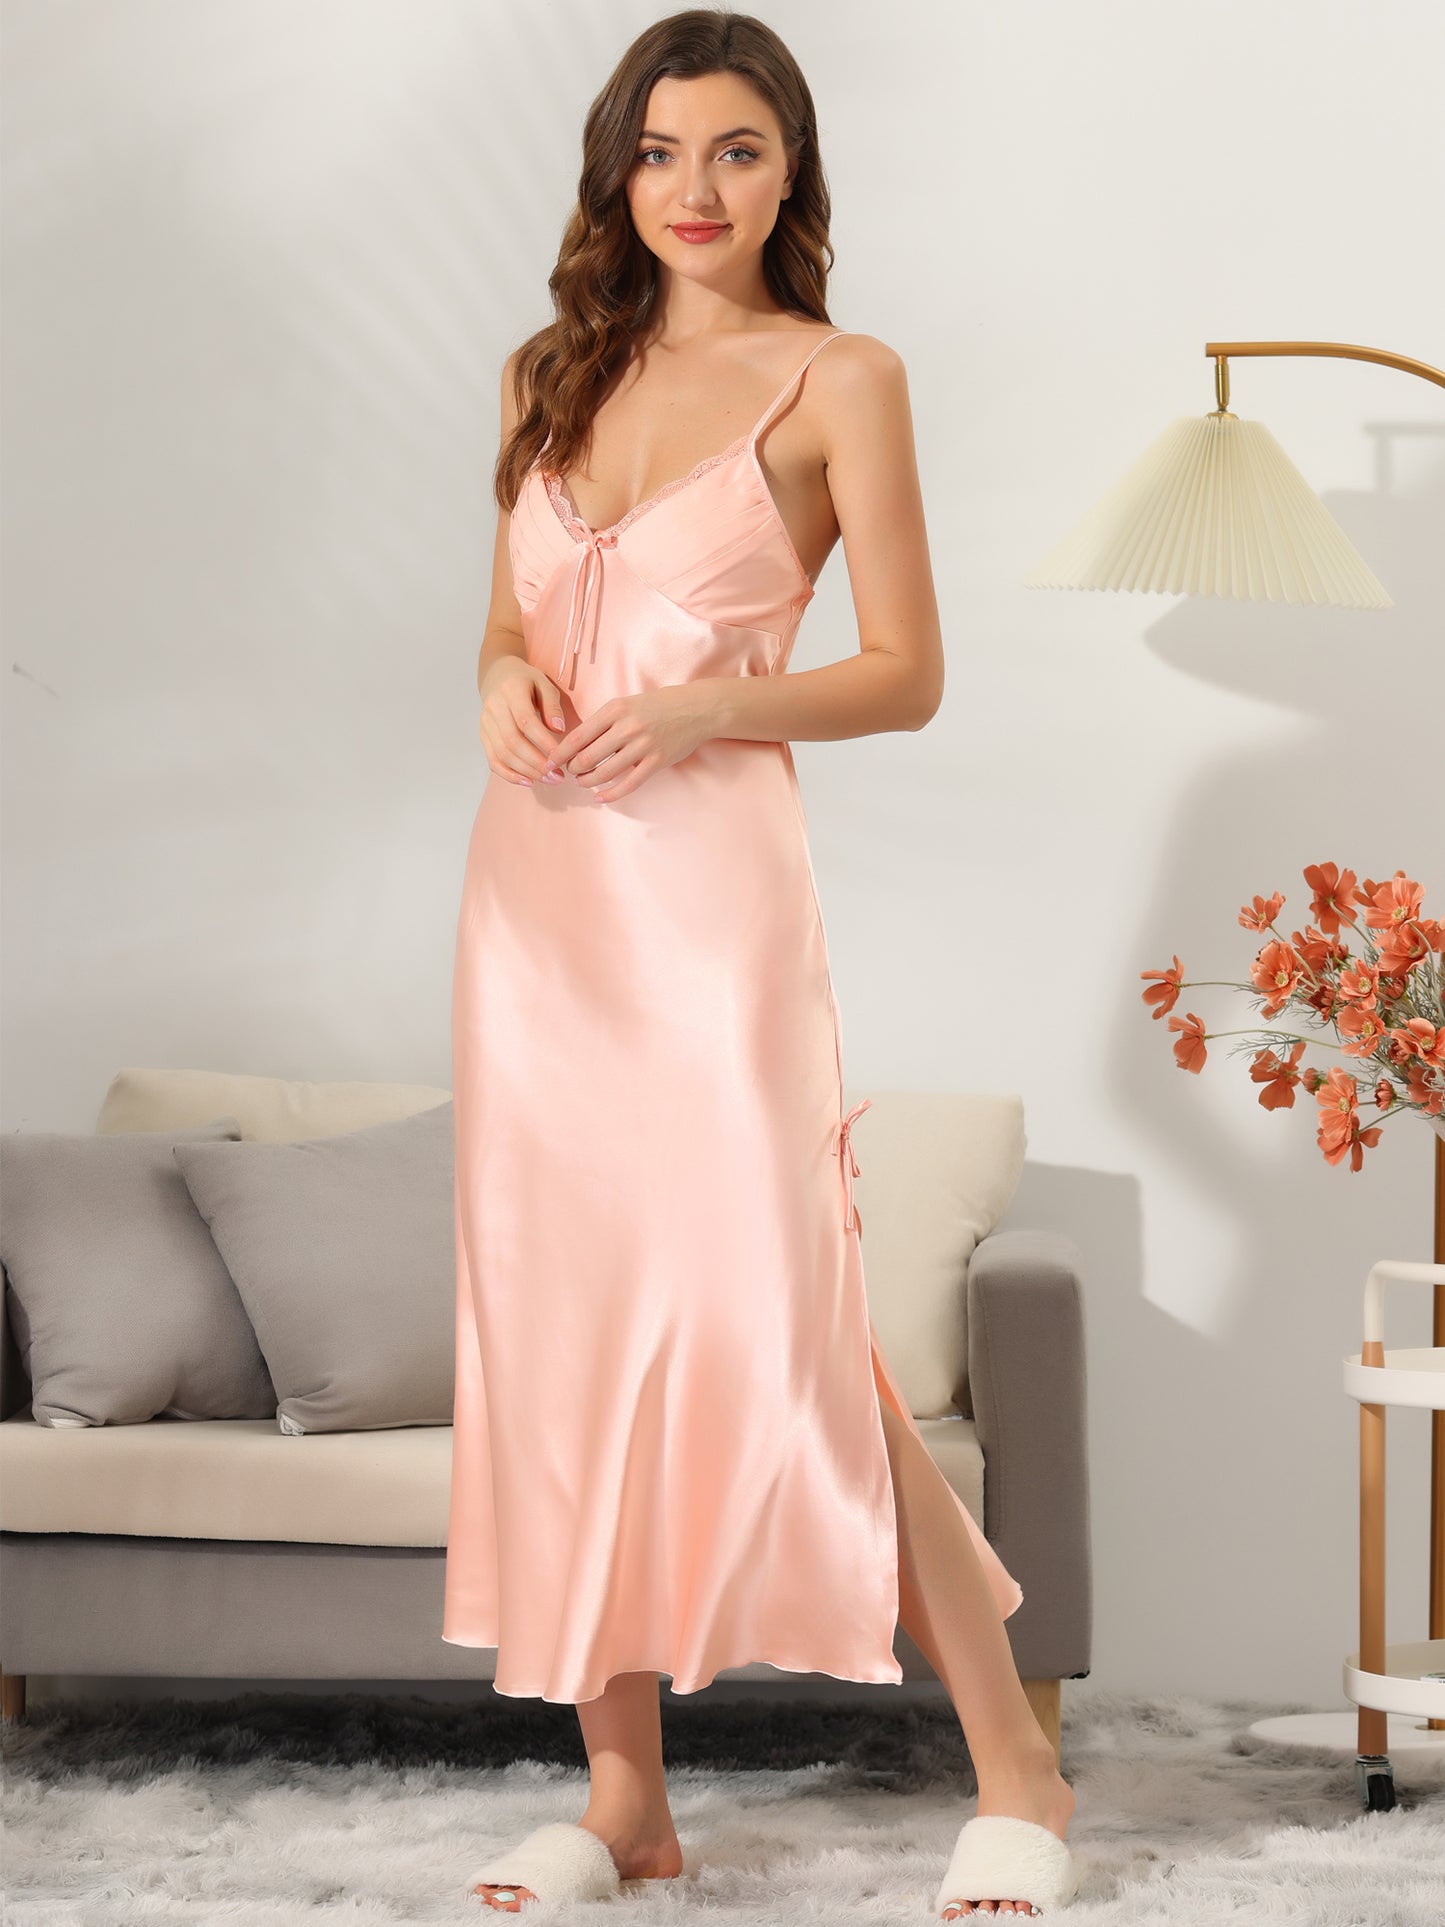 cheibear Satin Slip Dress Chemise Silky Lounge Camisole Maxi Nightgowns Pink